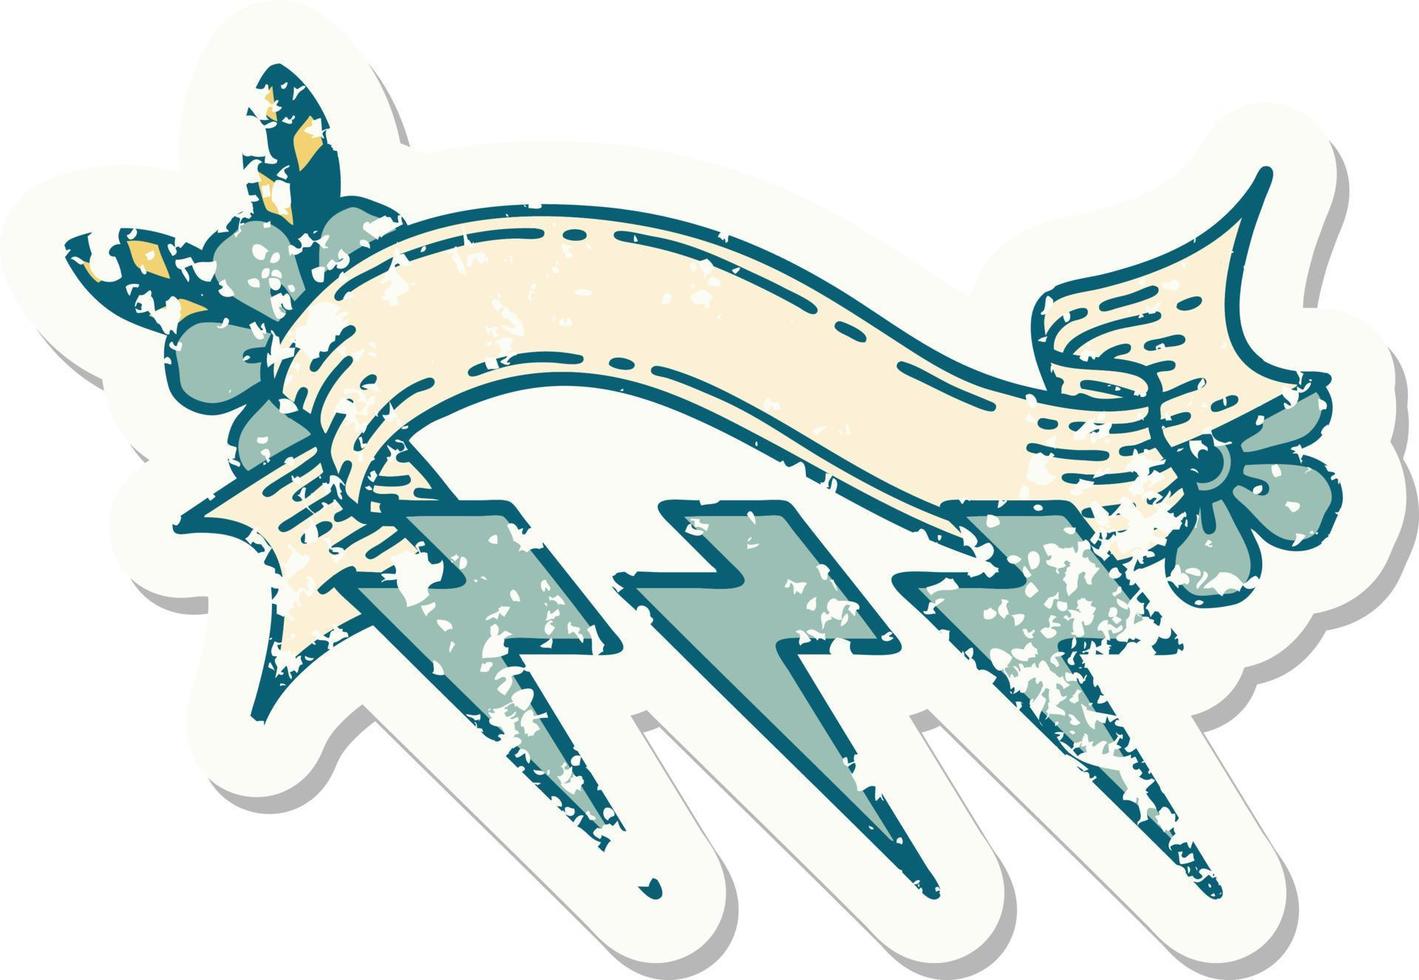 worn old sticker with banner of lighting bolts vector